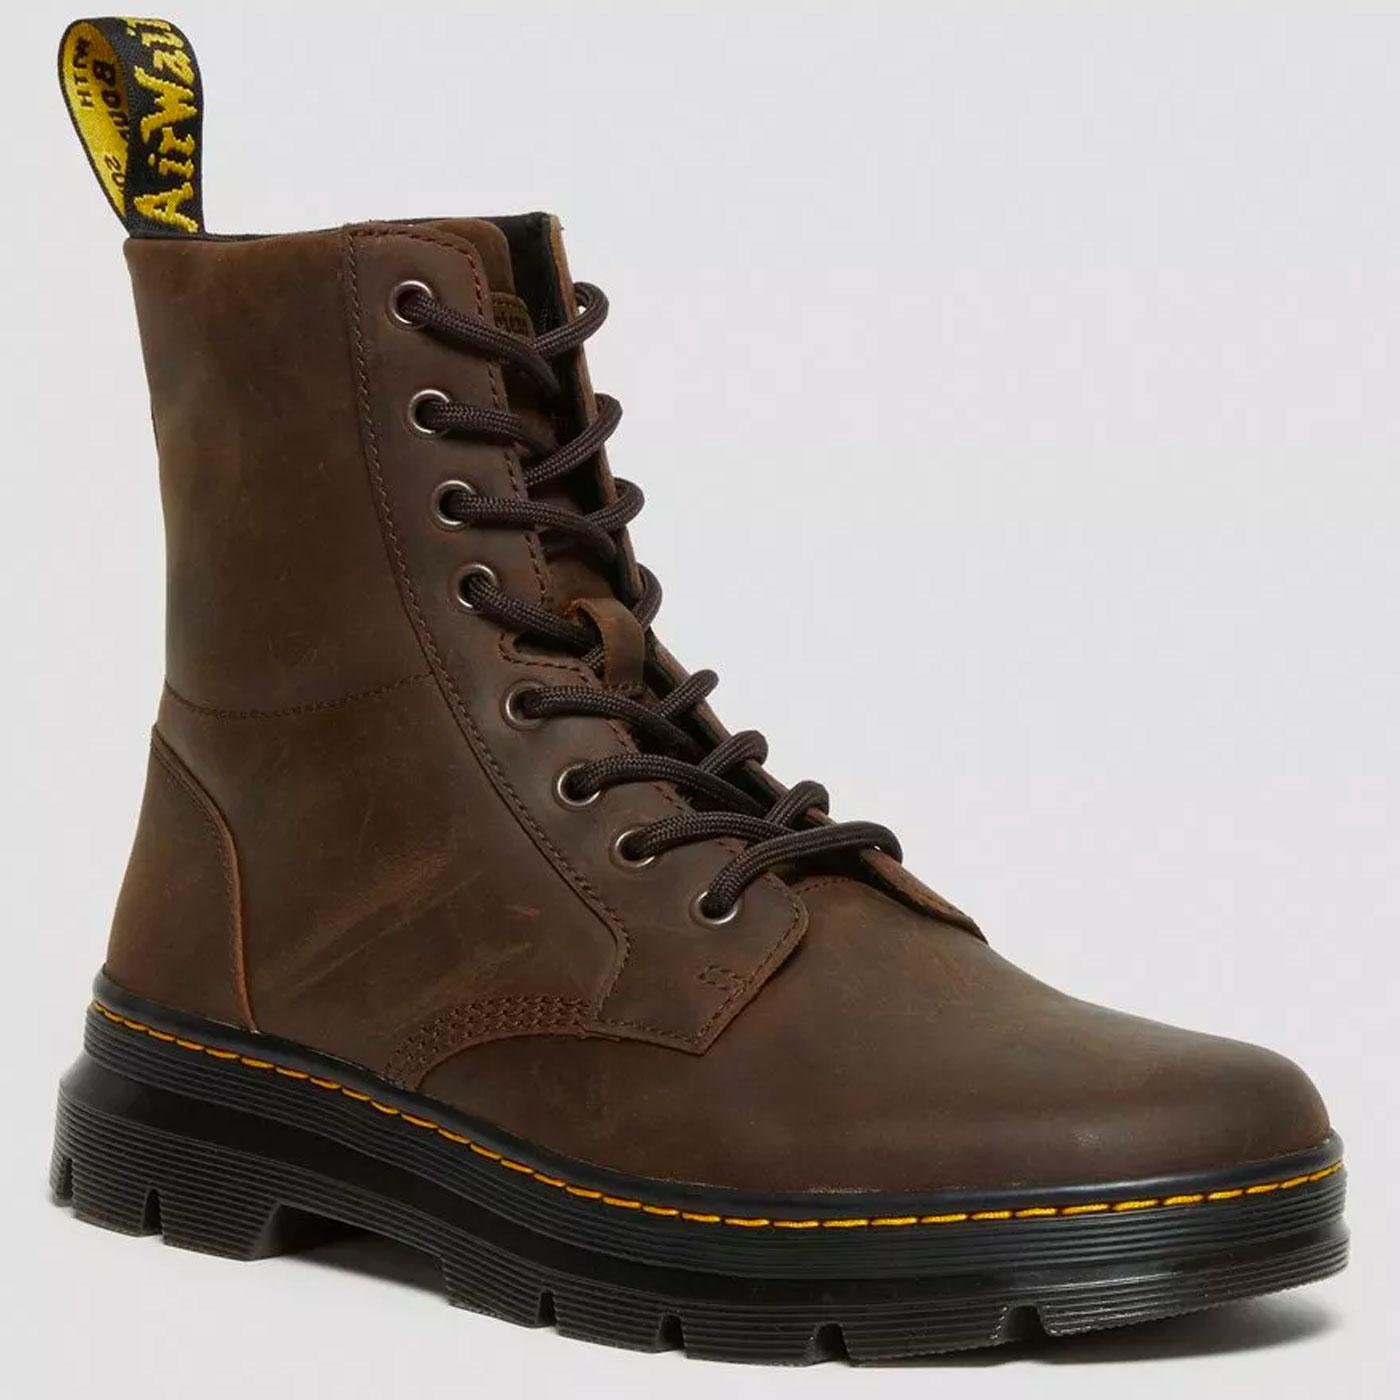 Combs Dr Martens Crazy Horse Leather Utility Boots